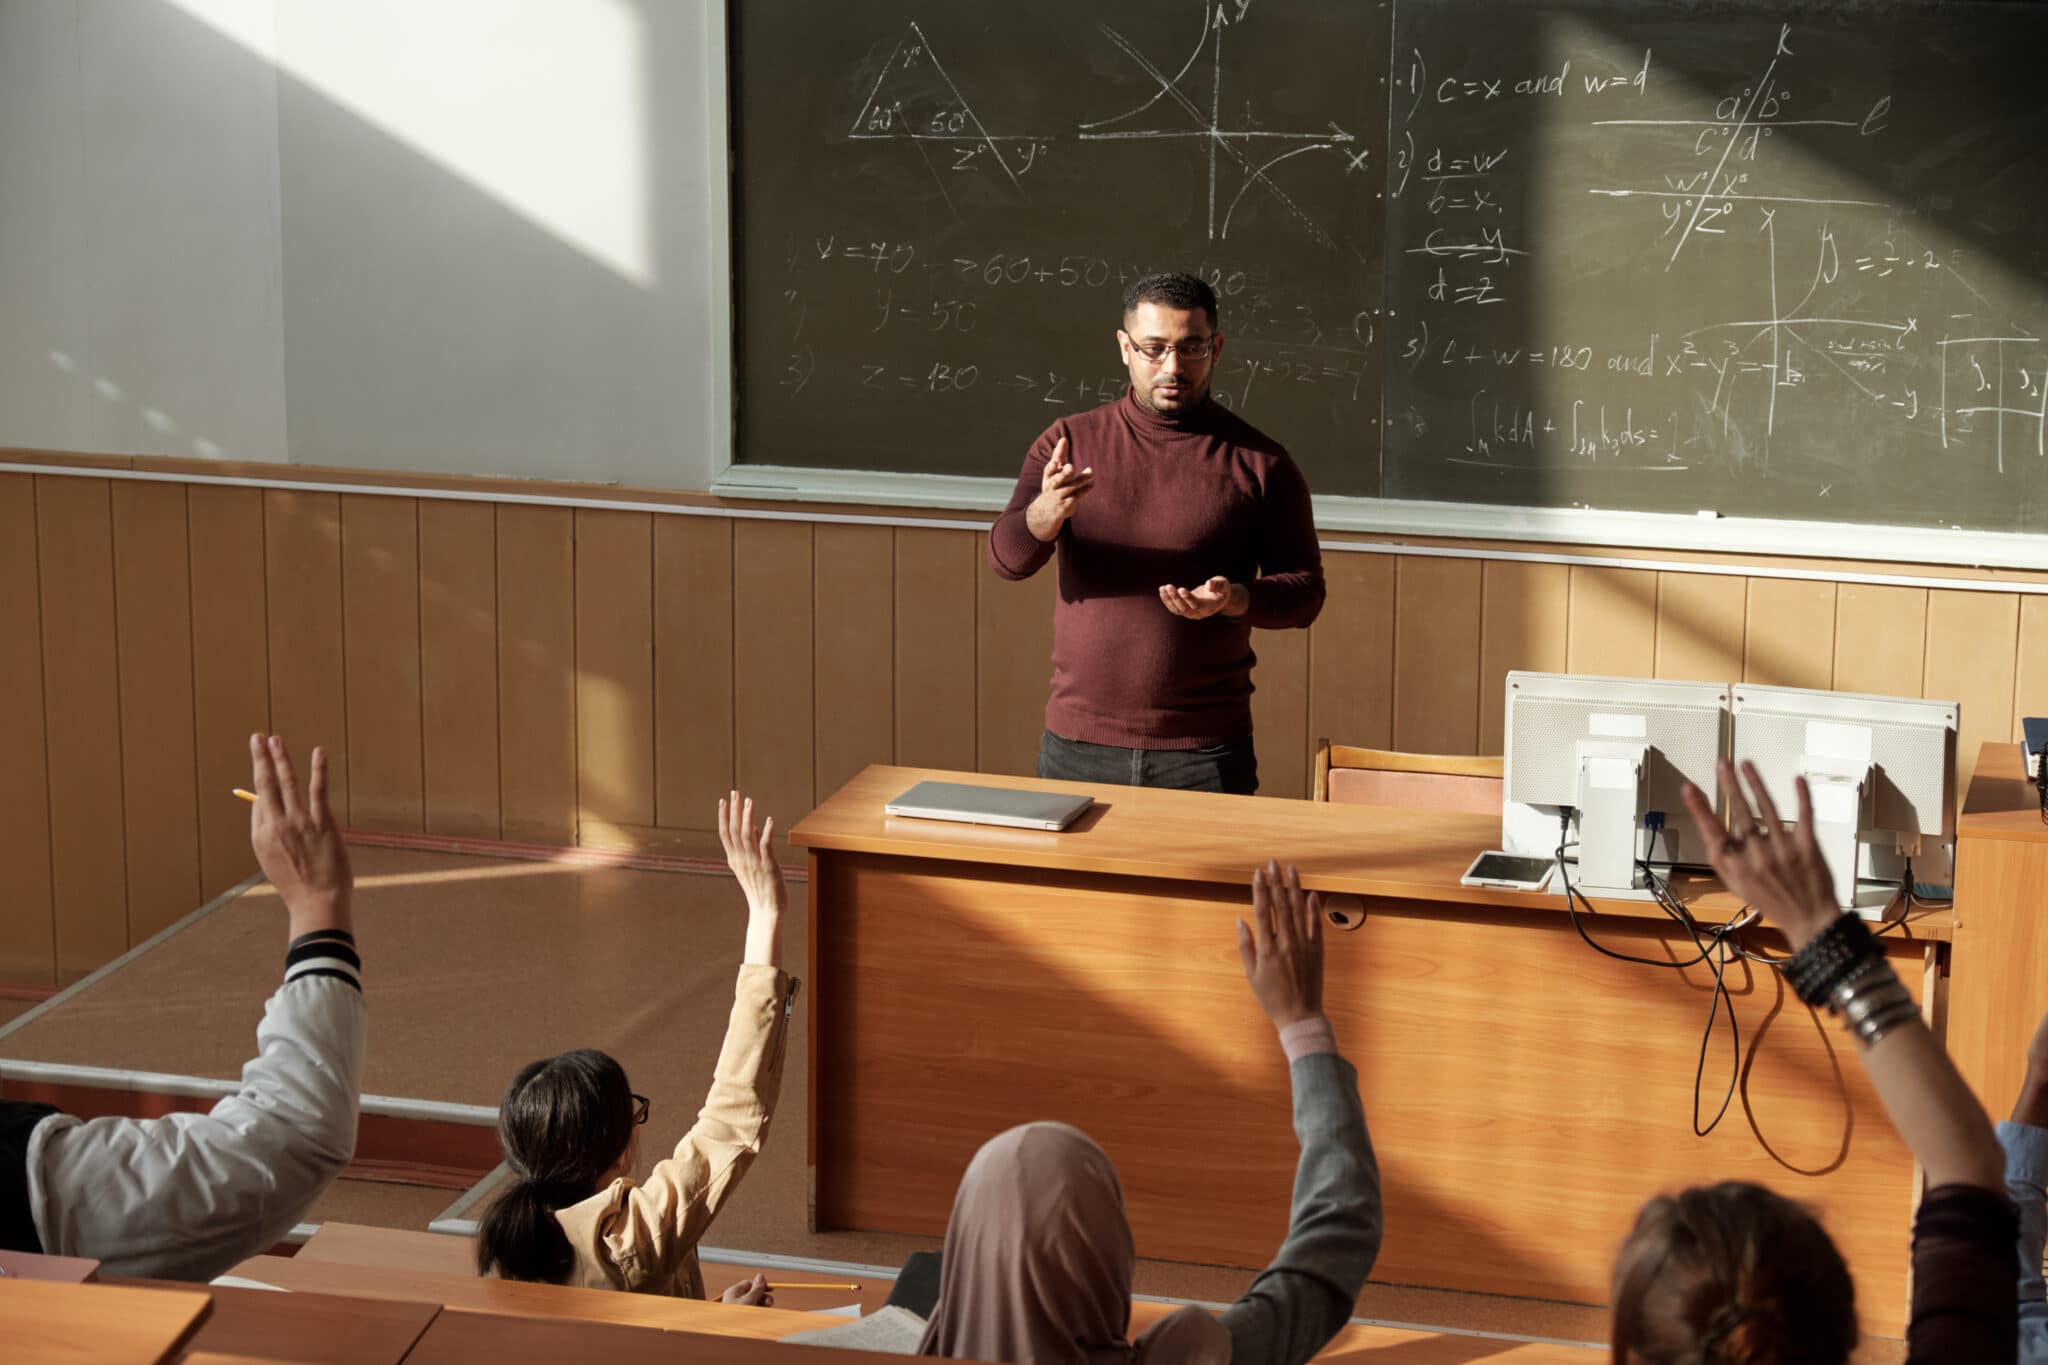 Middle aged teacher in casualwear standing by blackboard in lecture hall and lecturing students. Picture embodies a lesson about administrative appointments.